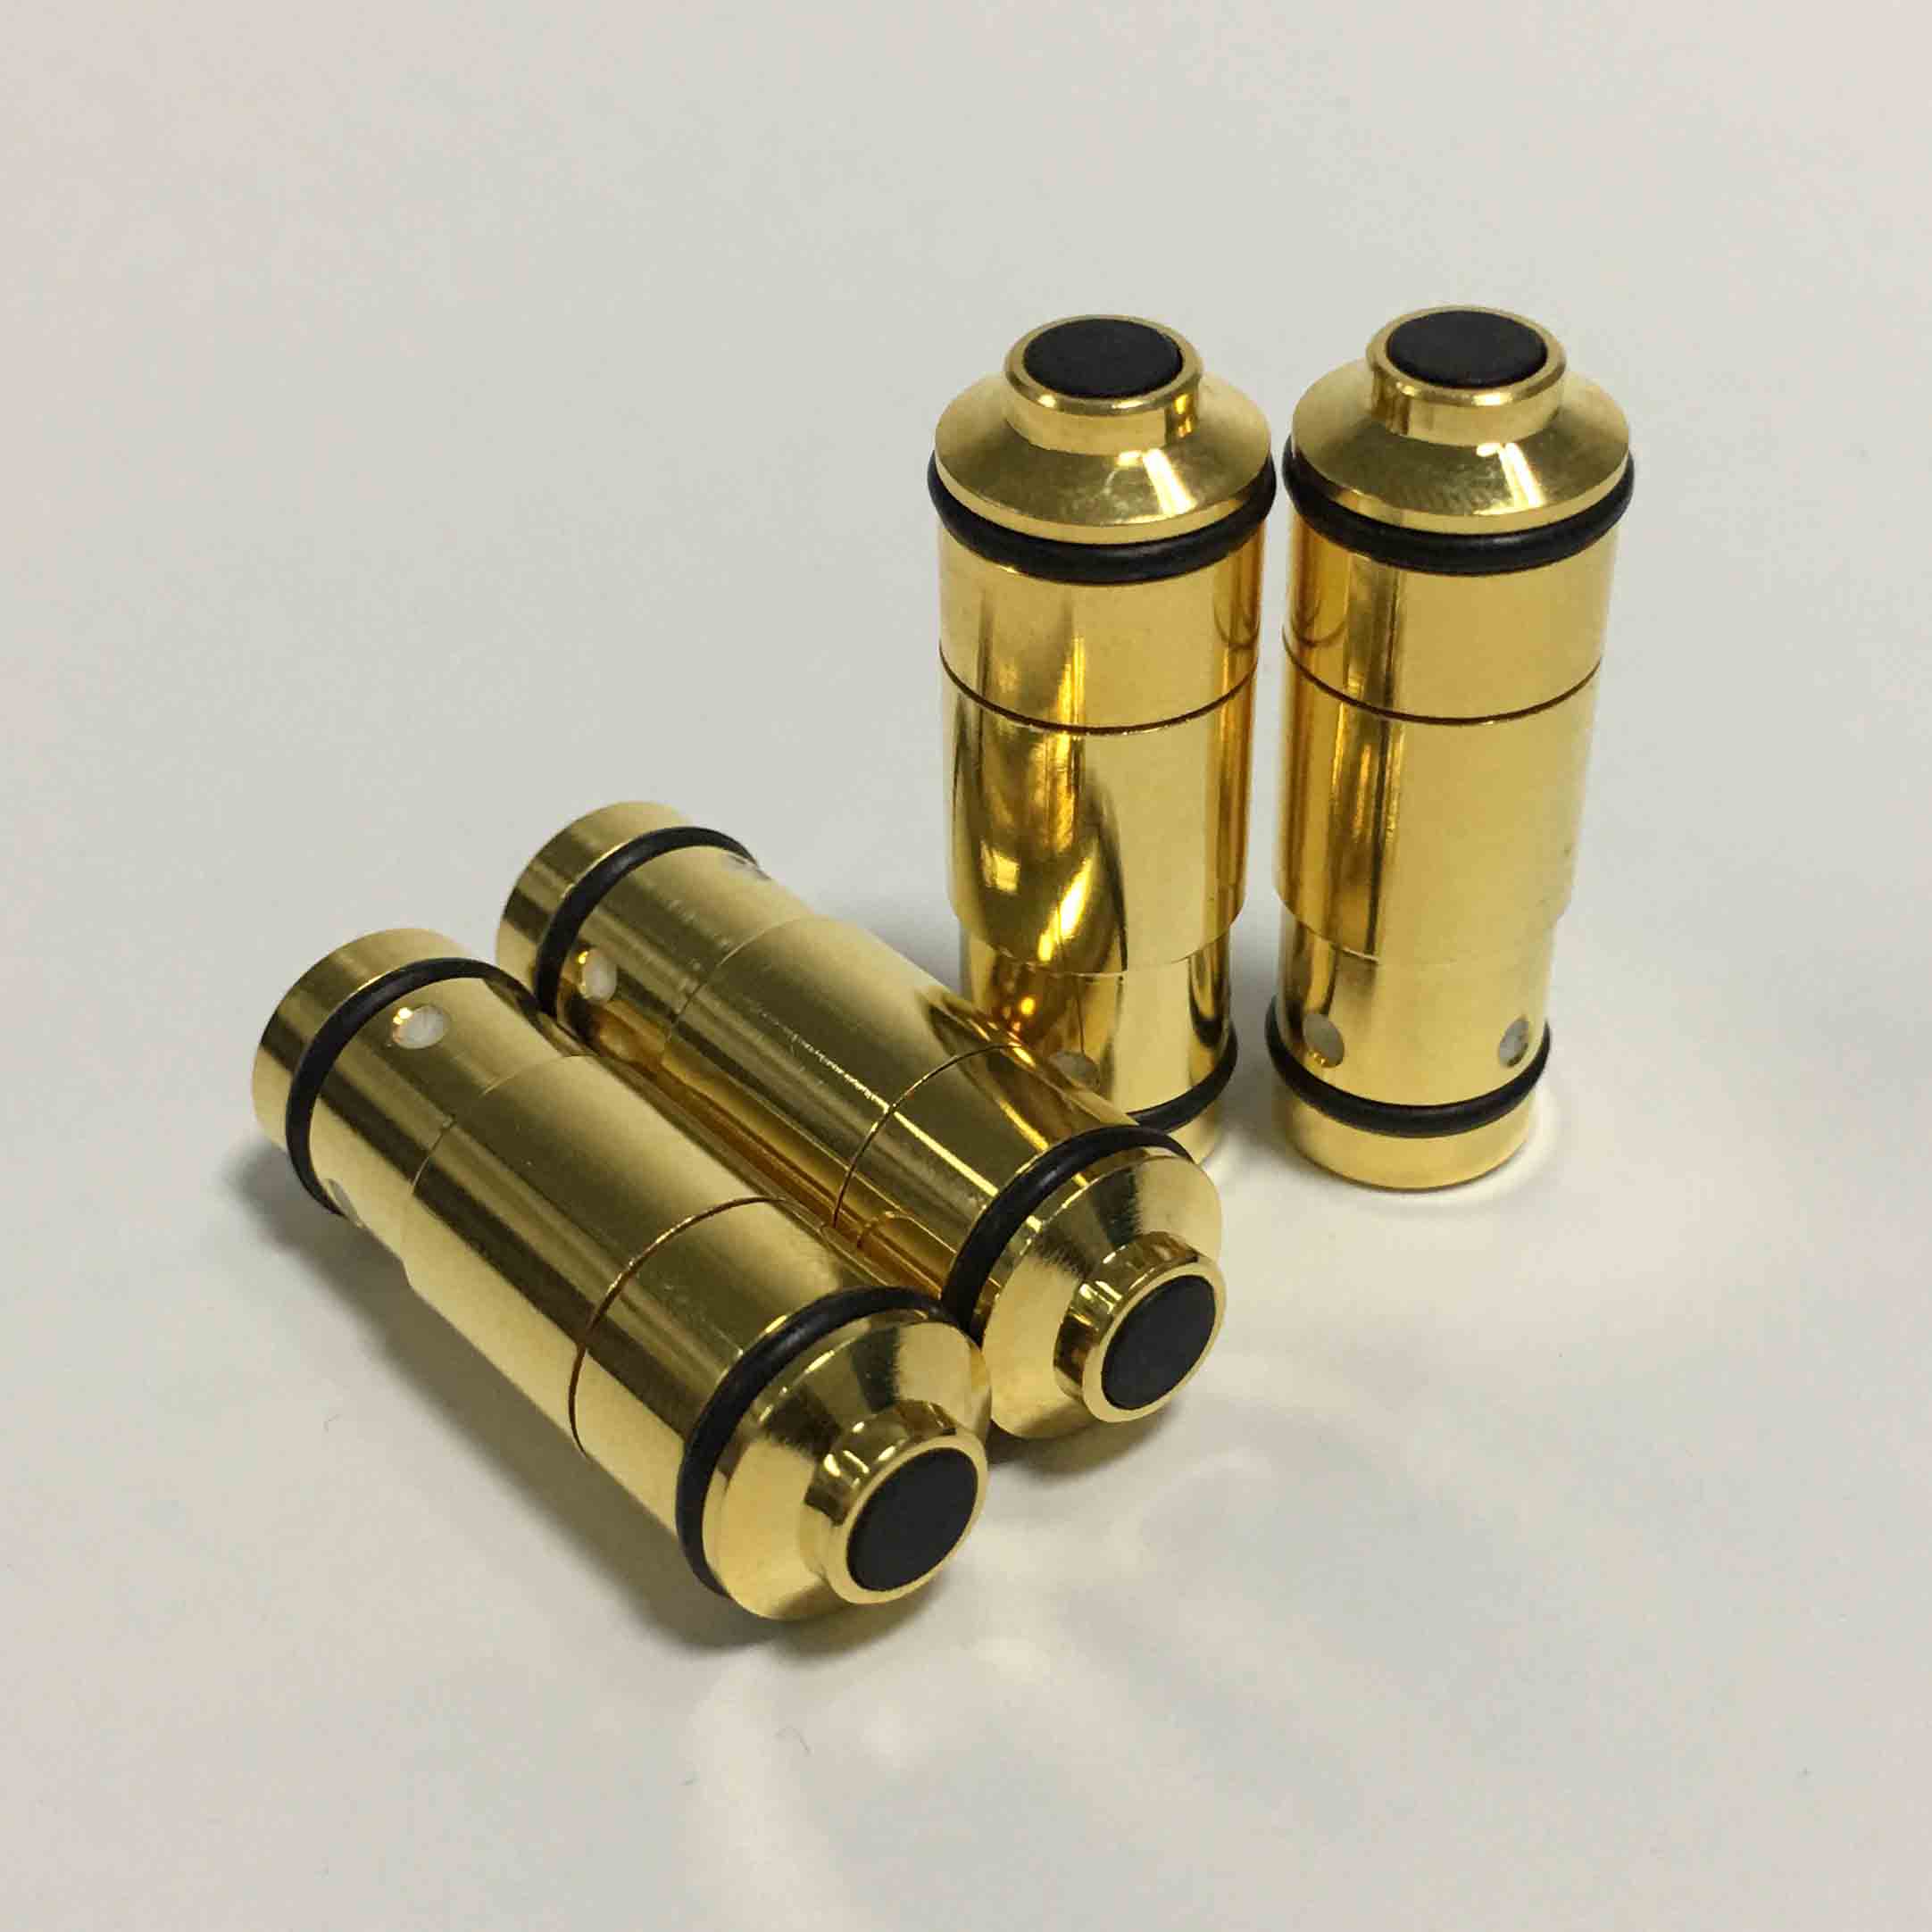 9mm Laser Ammo Laser Bullet Laser Cartridge for Dry Fire Training and Shooting 